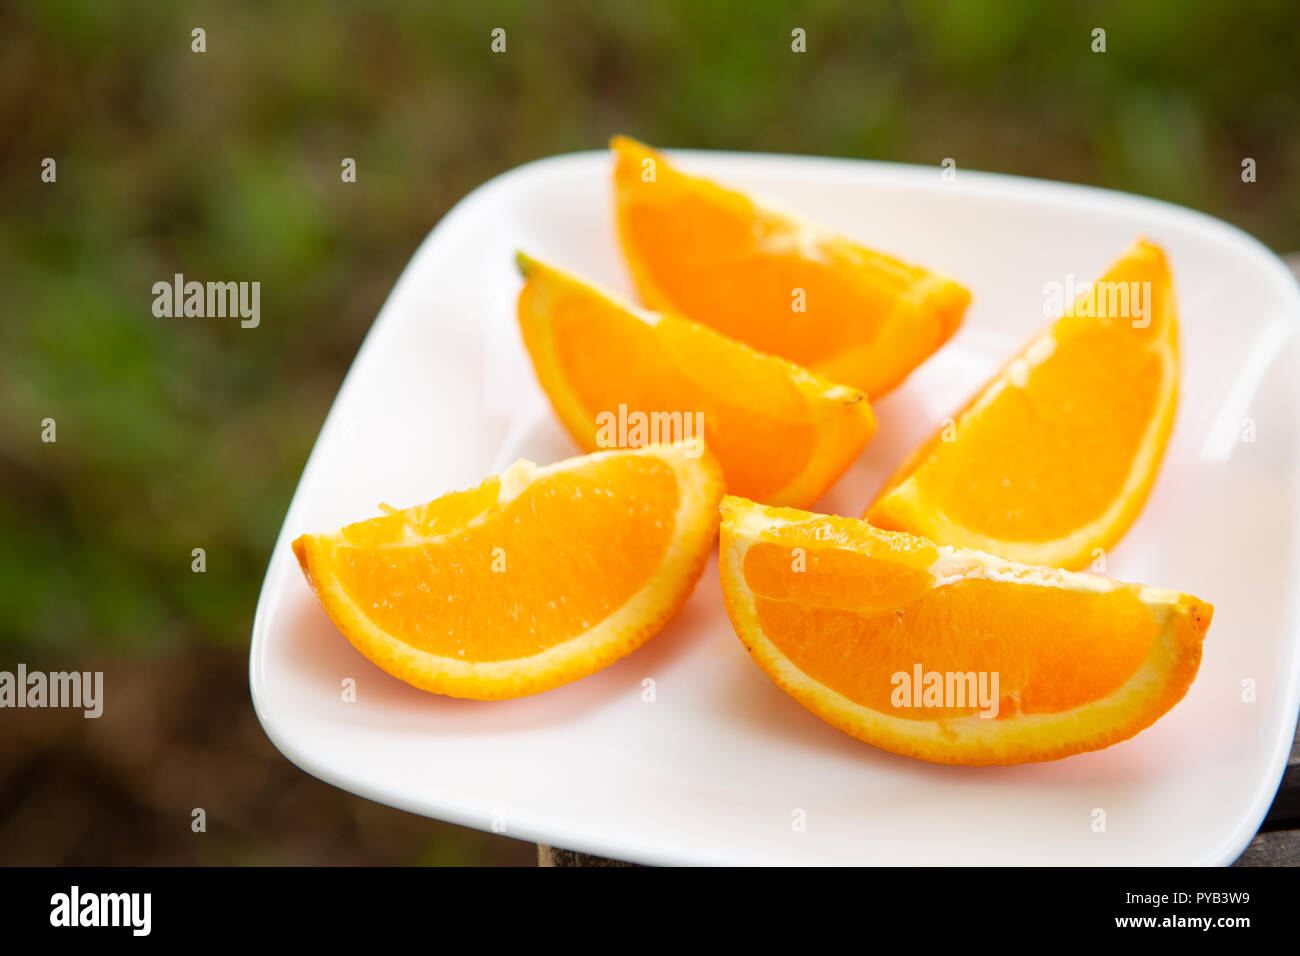 orange wedges on white plate set on wood surface with green background Stock Photo